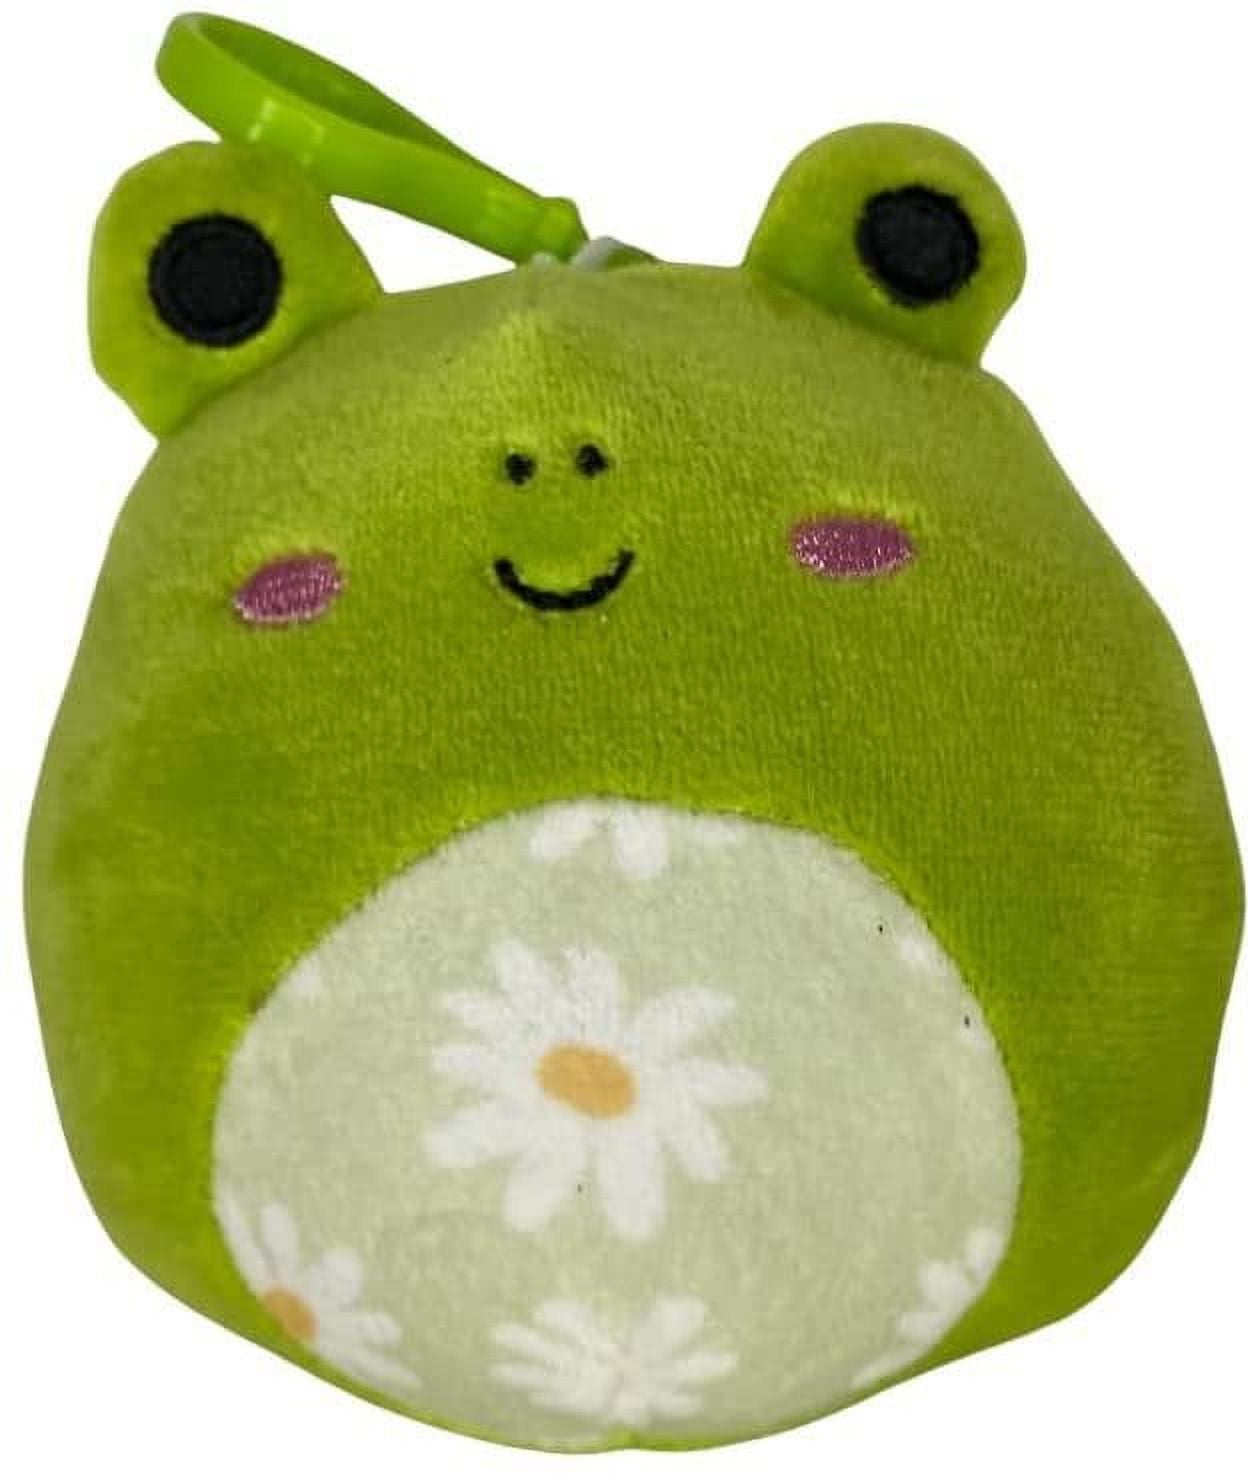 Squishmallows 5 Wendy The Frog - Officially Licensed Kellytoy Plush -  Collectible Soft & Squishy Mini Frog Stuffed Animal Toy - Add to Your Squad  